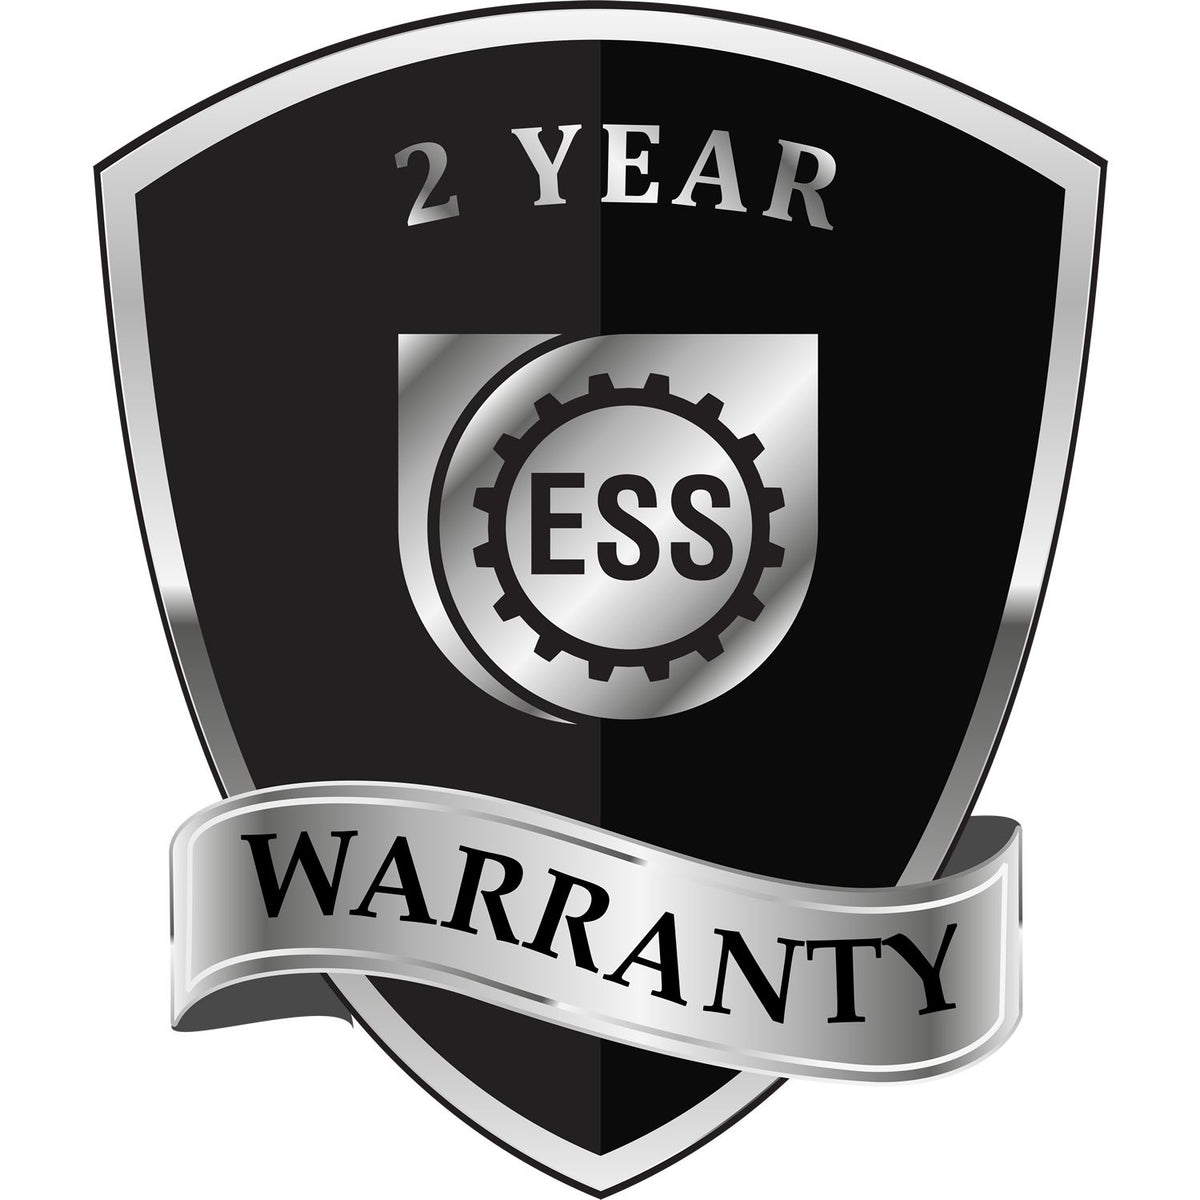 A black and silver badge or emblem showing warranty information for the Gift Michigan Geologist Seal